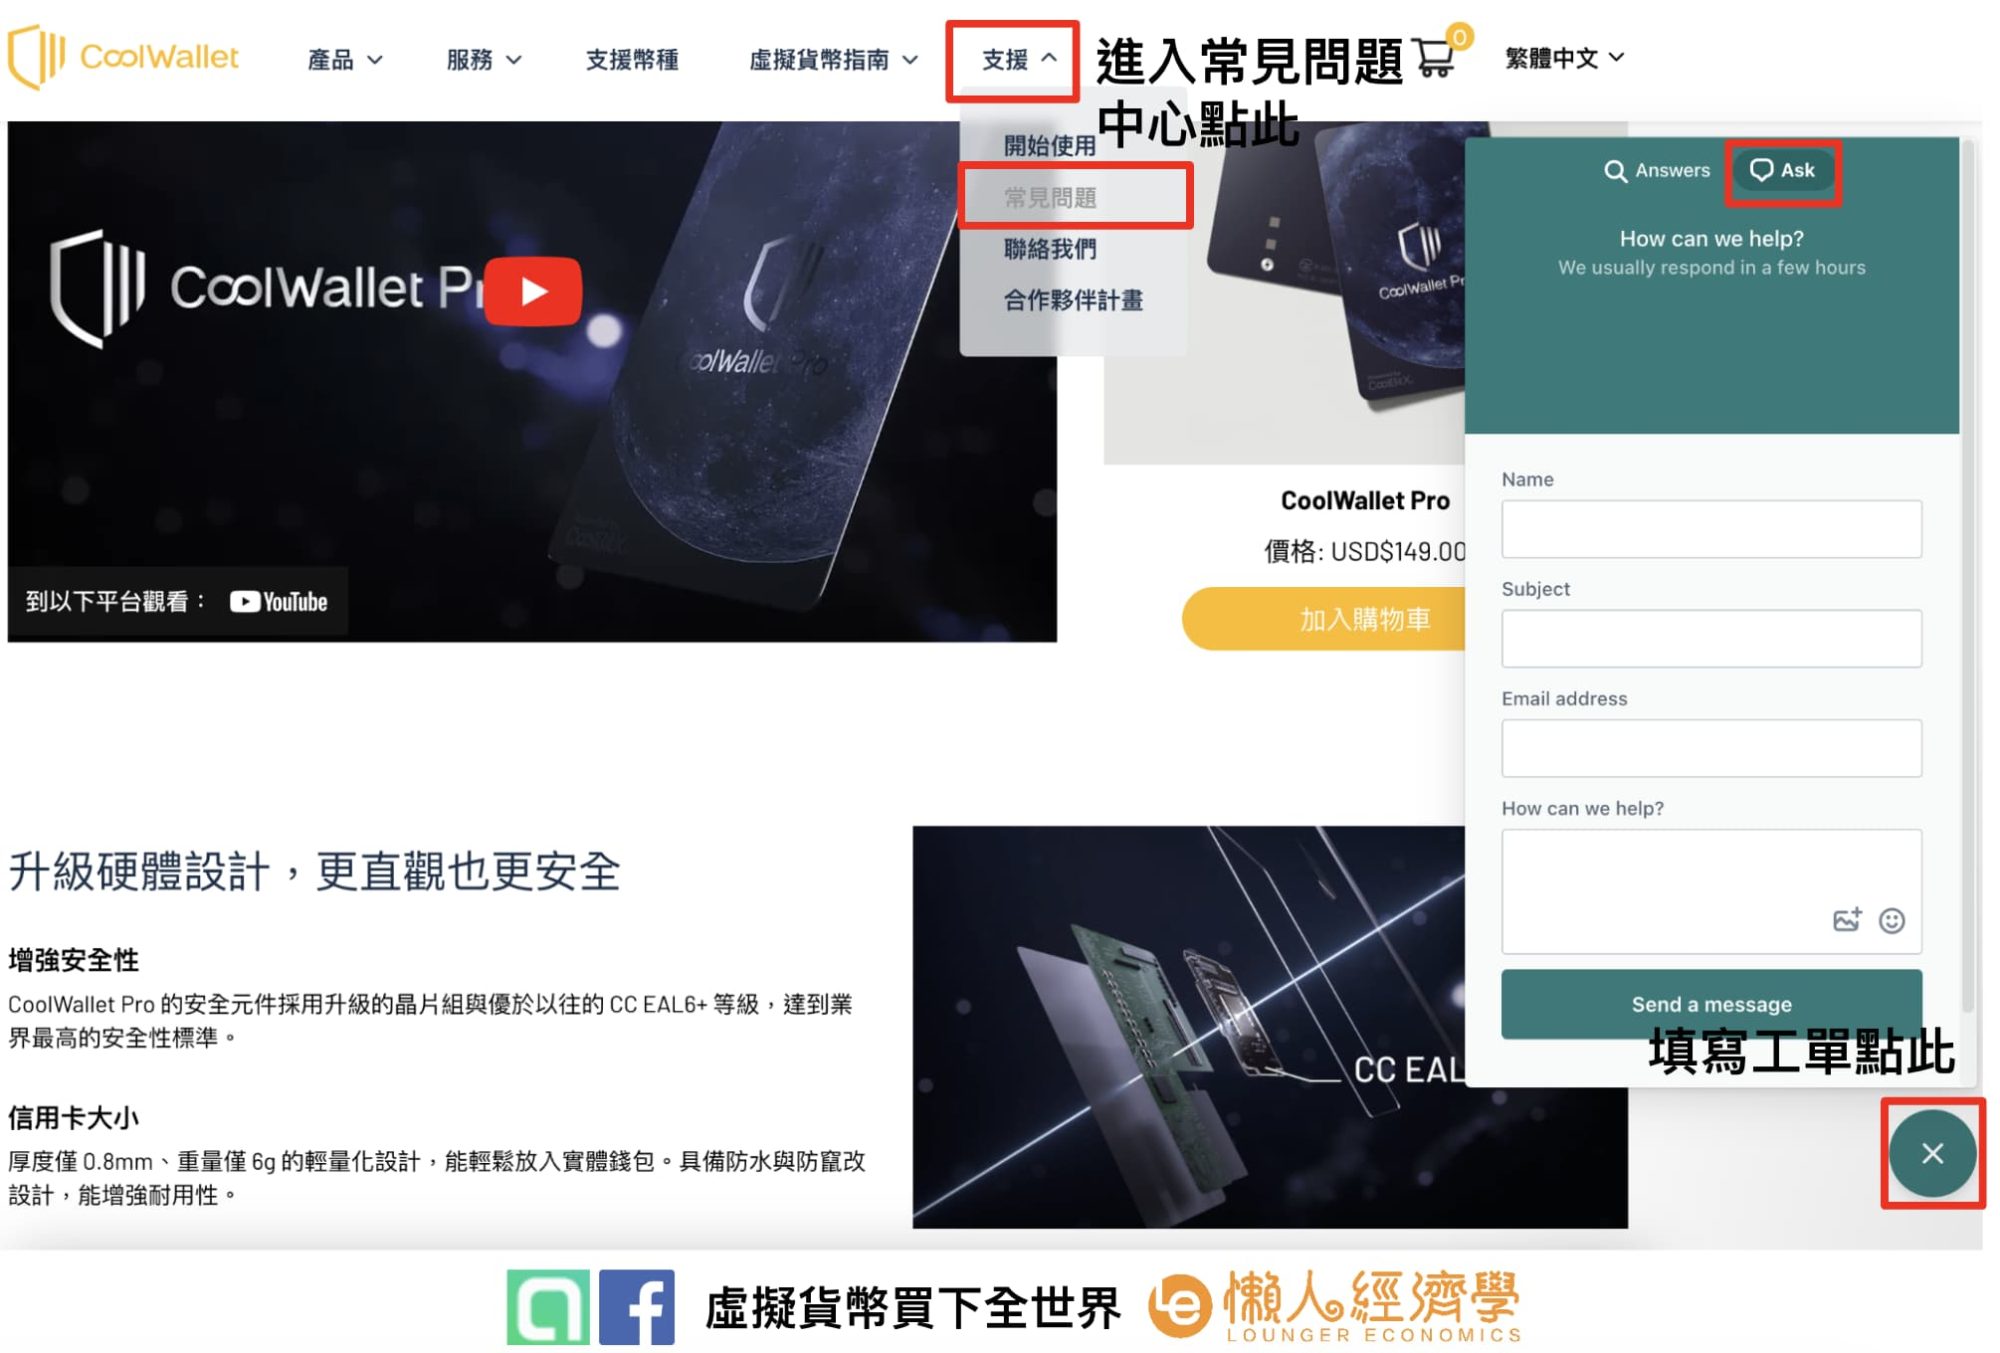 CoolWallet Pro 客服管道？